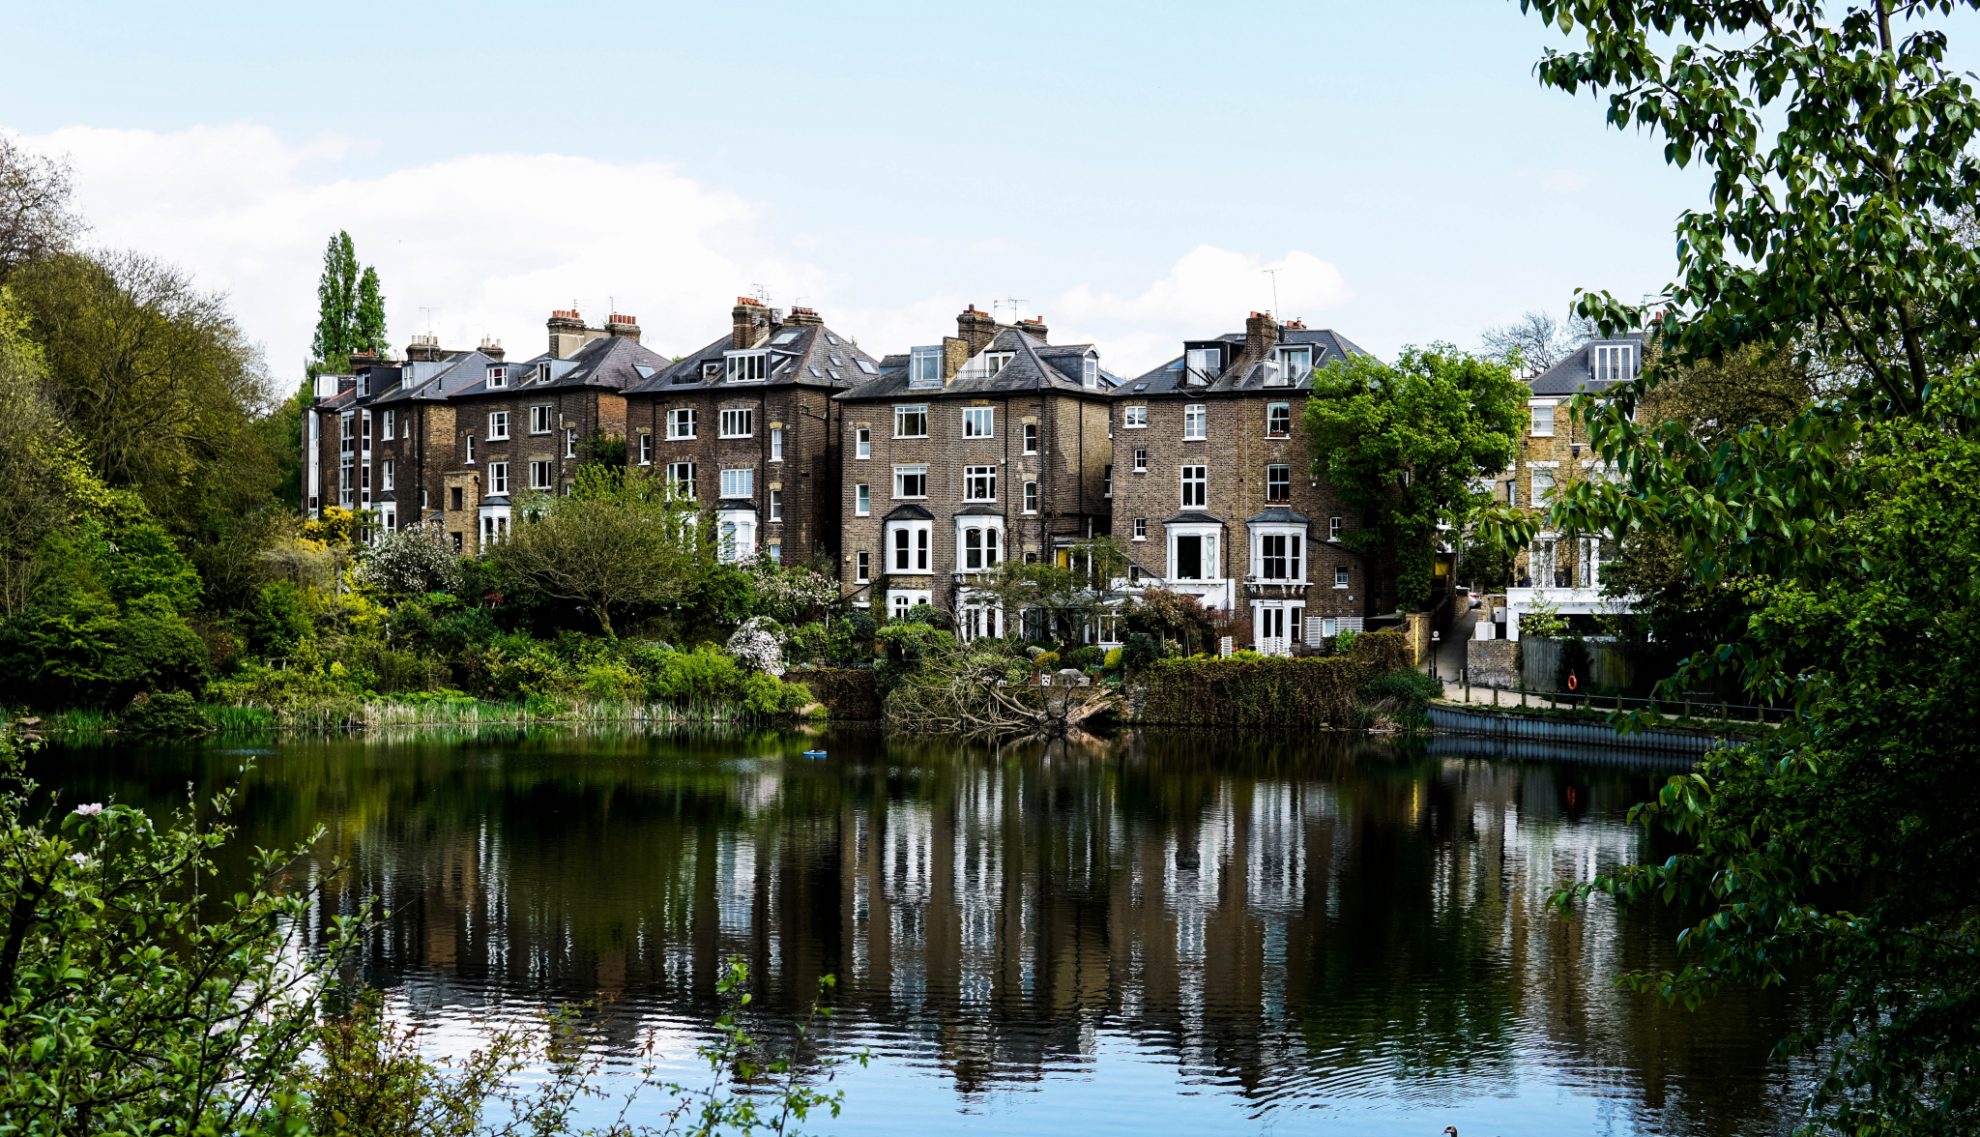 Houses overlooking a pond in Hampstead in the NW3 London postcode